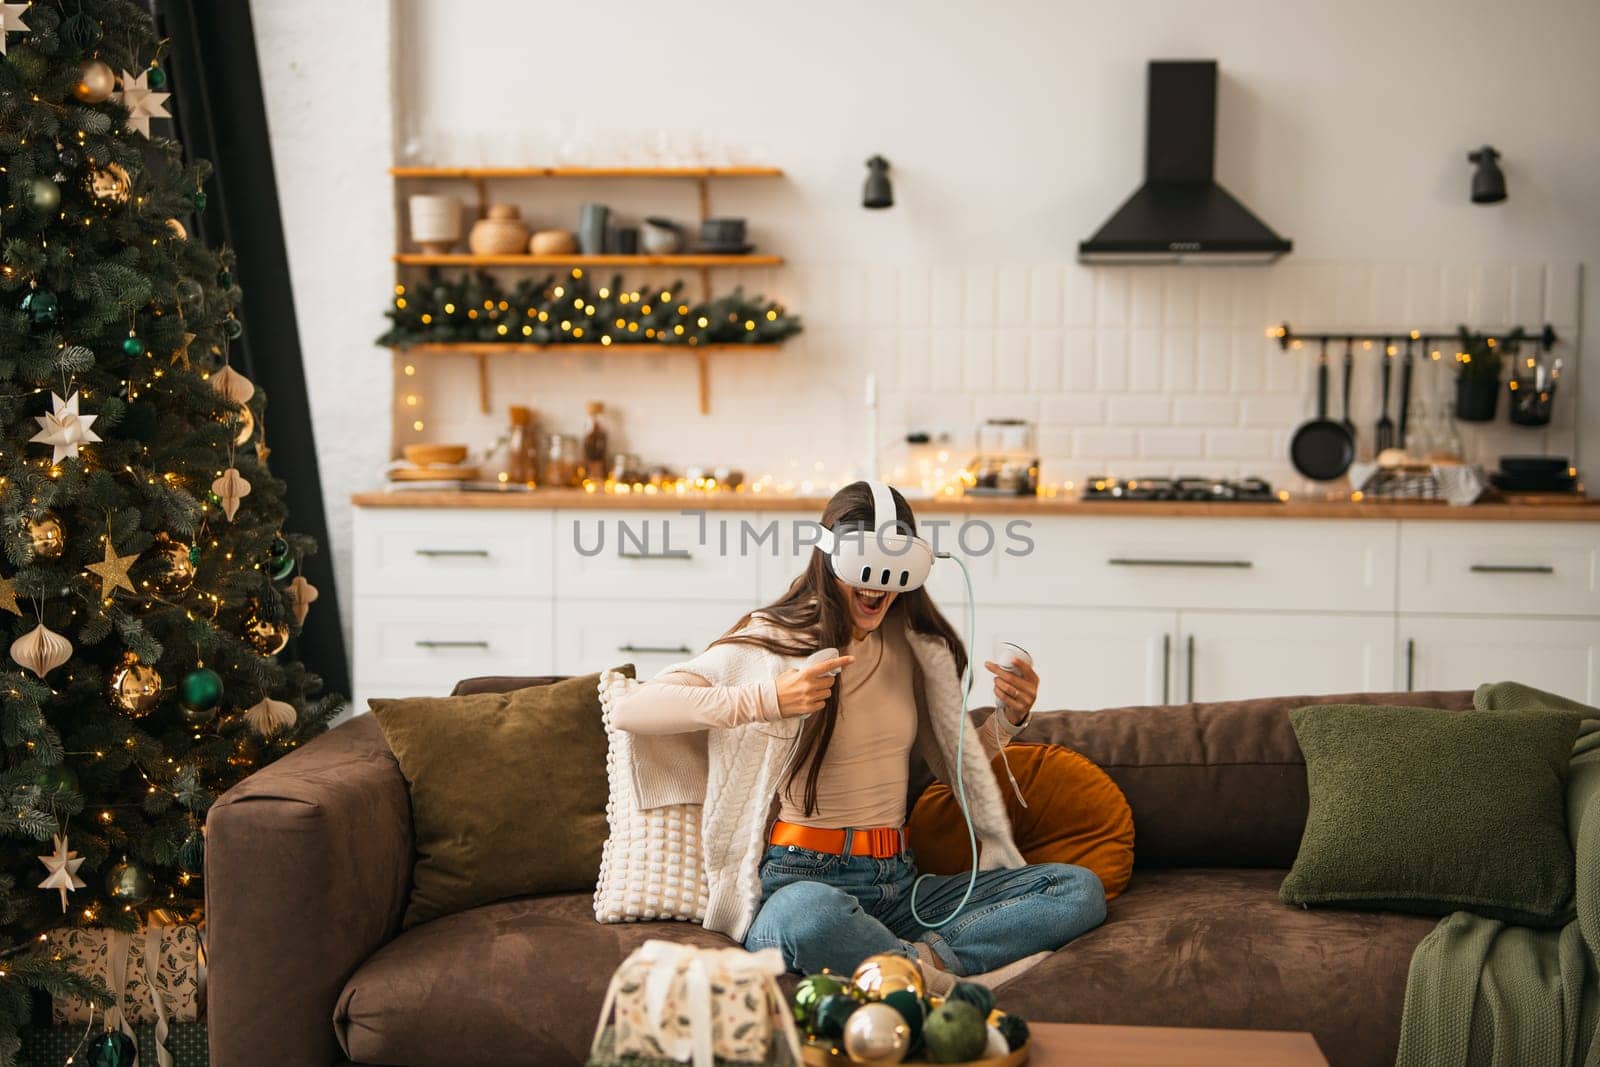 In a cozy holiday ambiance at home, a fashionable young lady uses a virtual reality headset. by teksomolika